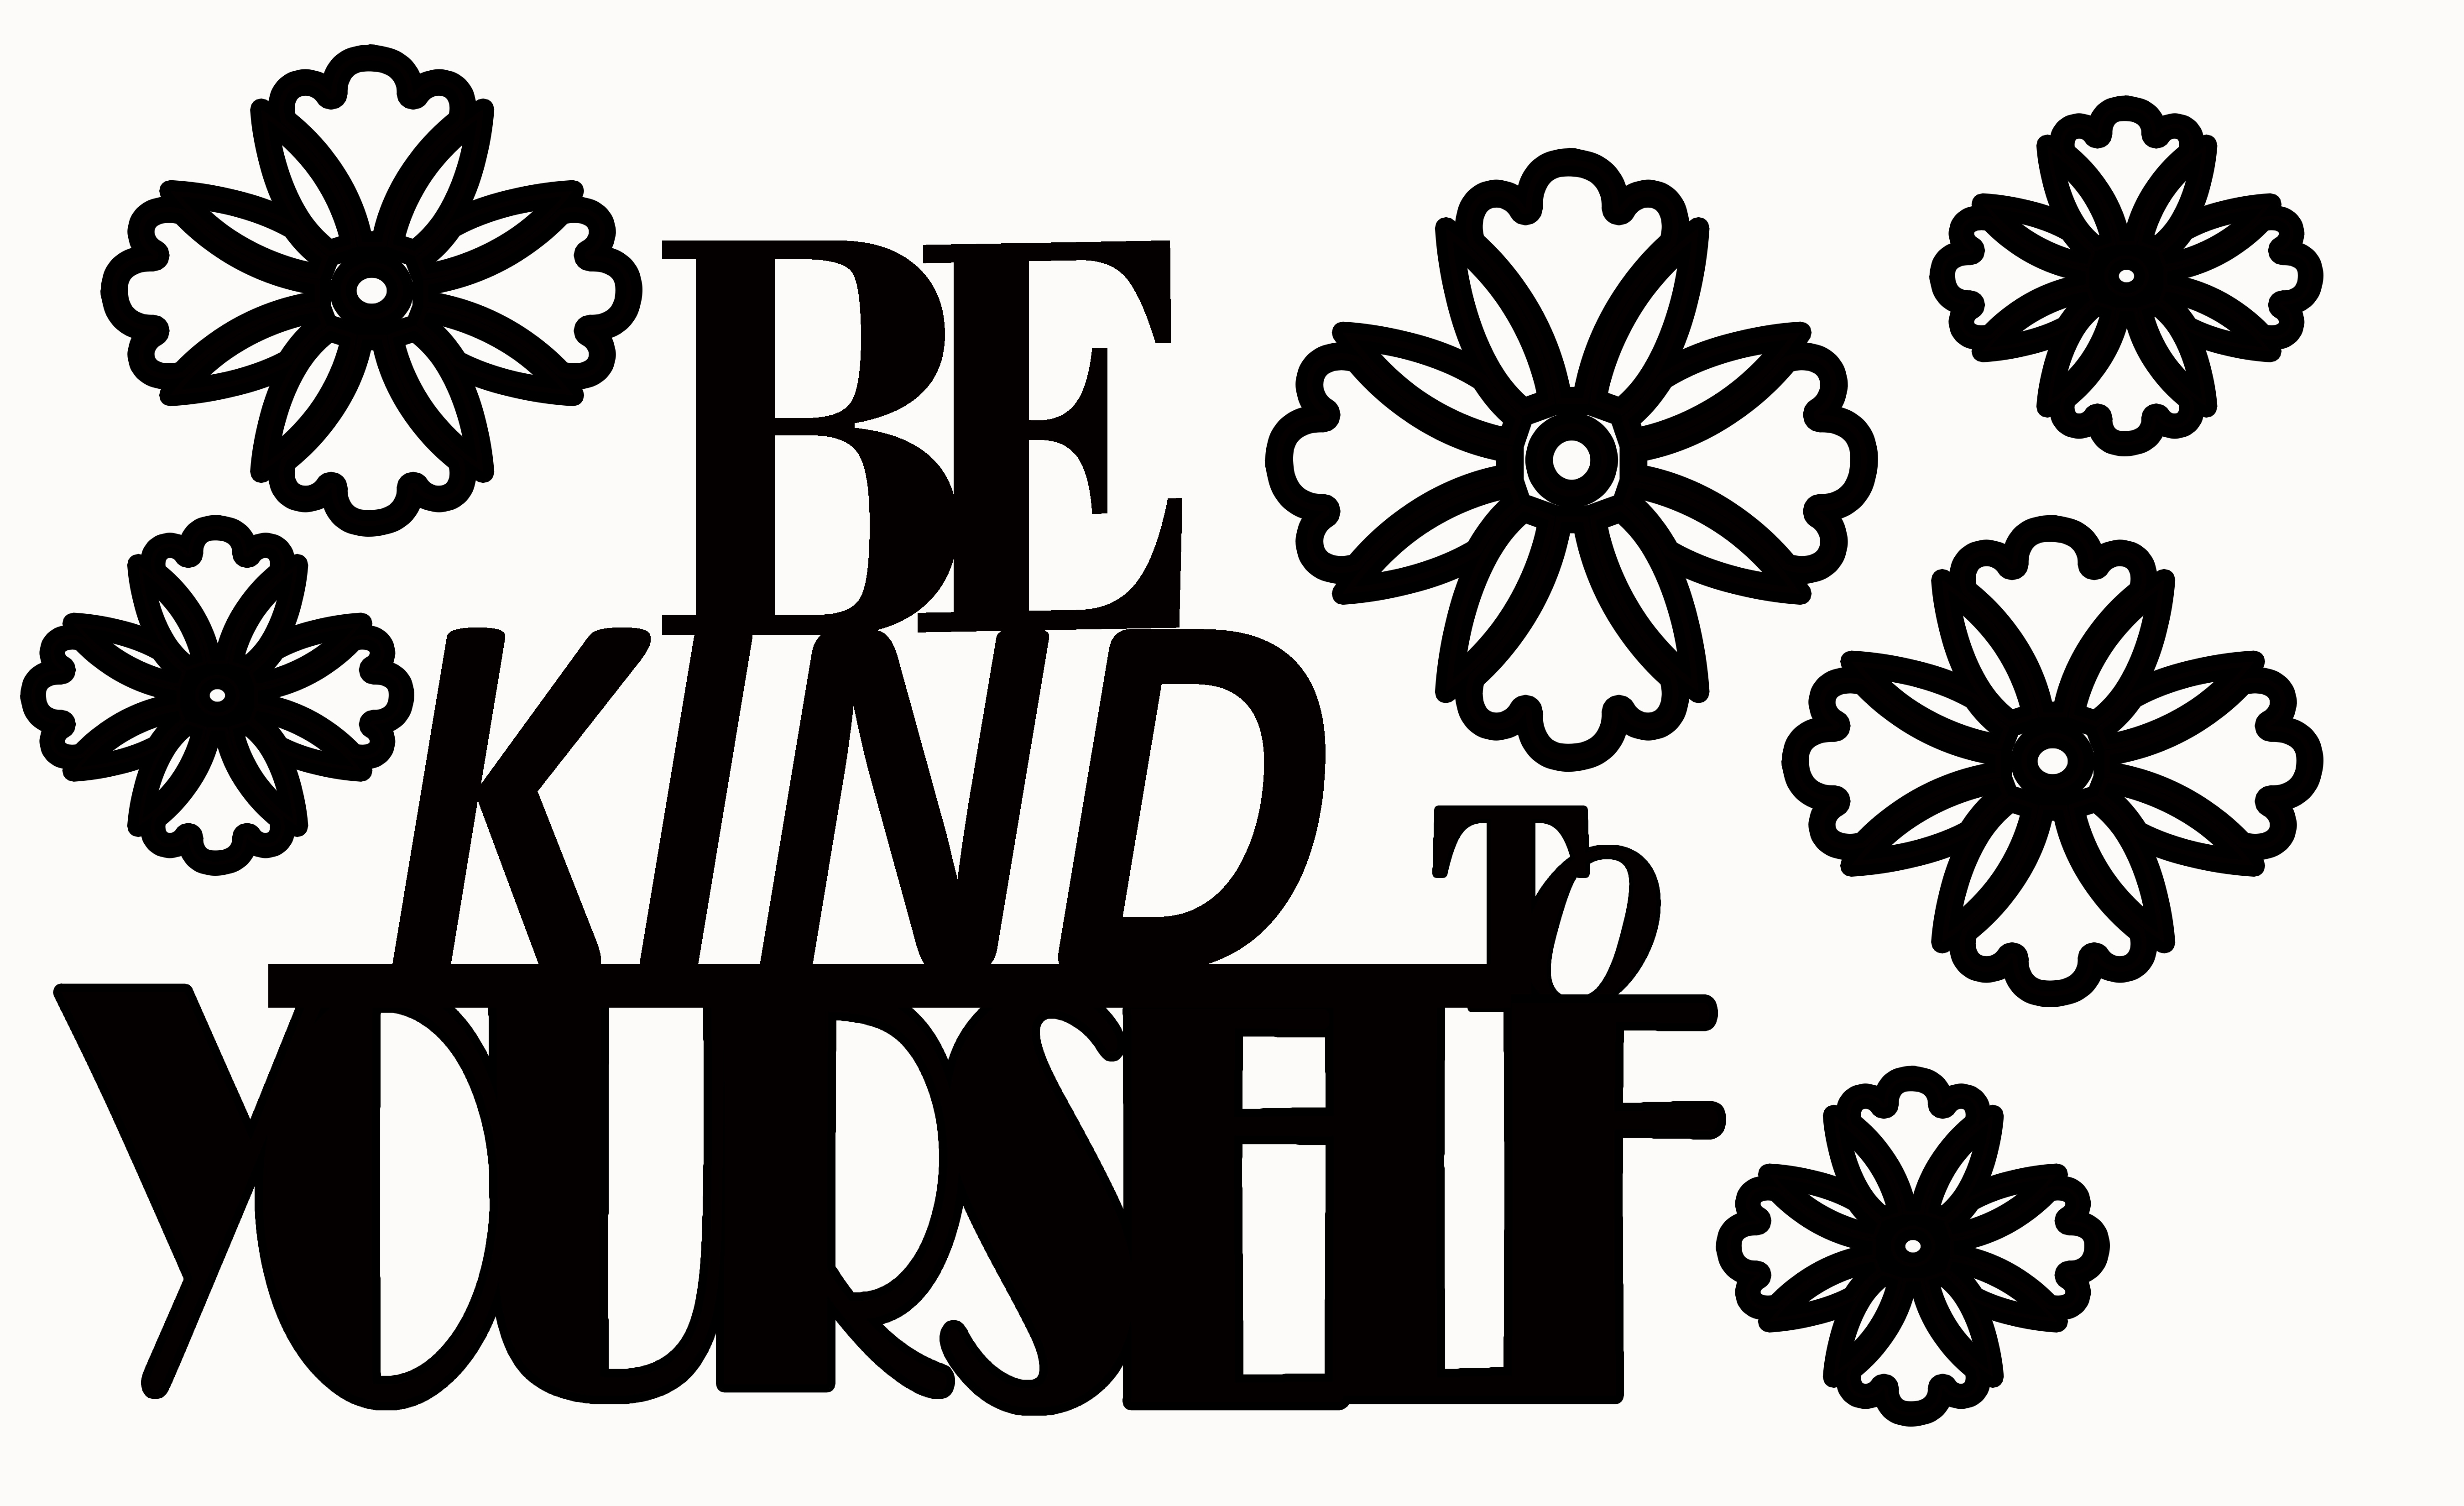 BE KIND TO YOURSELF 110 x 180 mm min buy 3